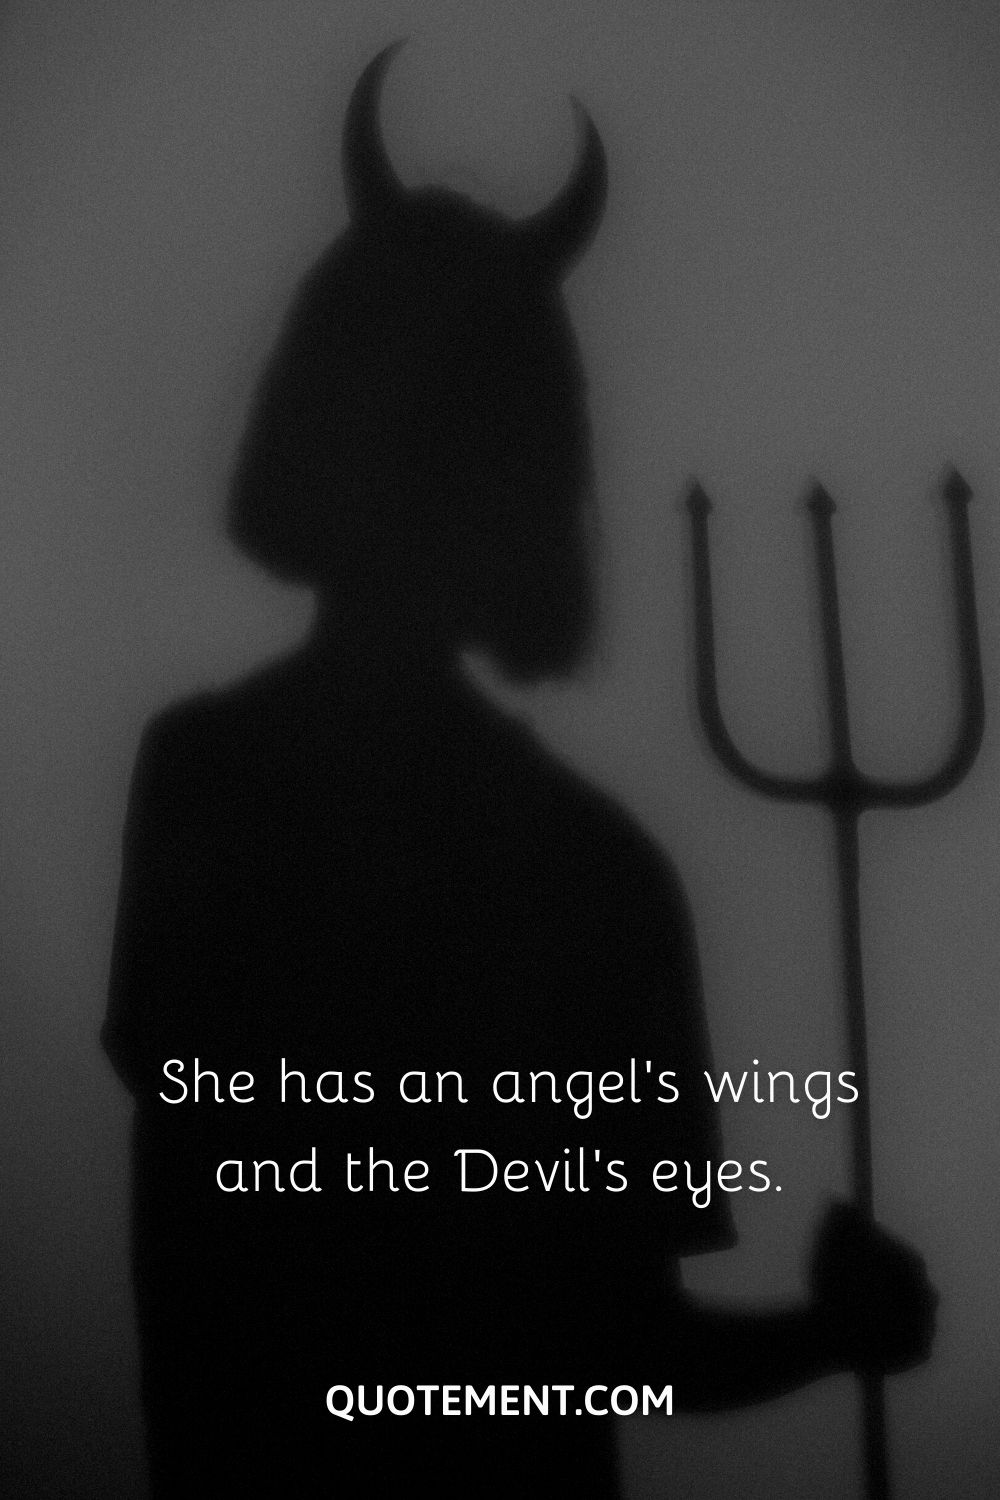 She has an angel’s wings and the Devil’s eyes.